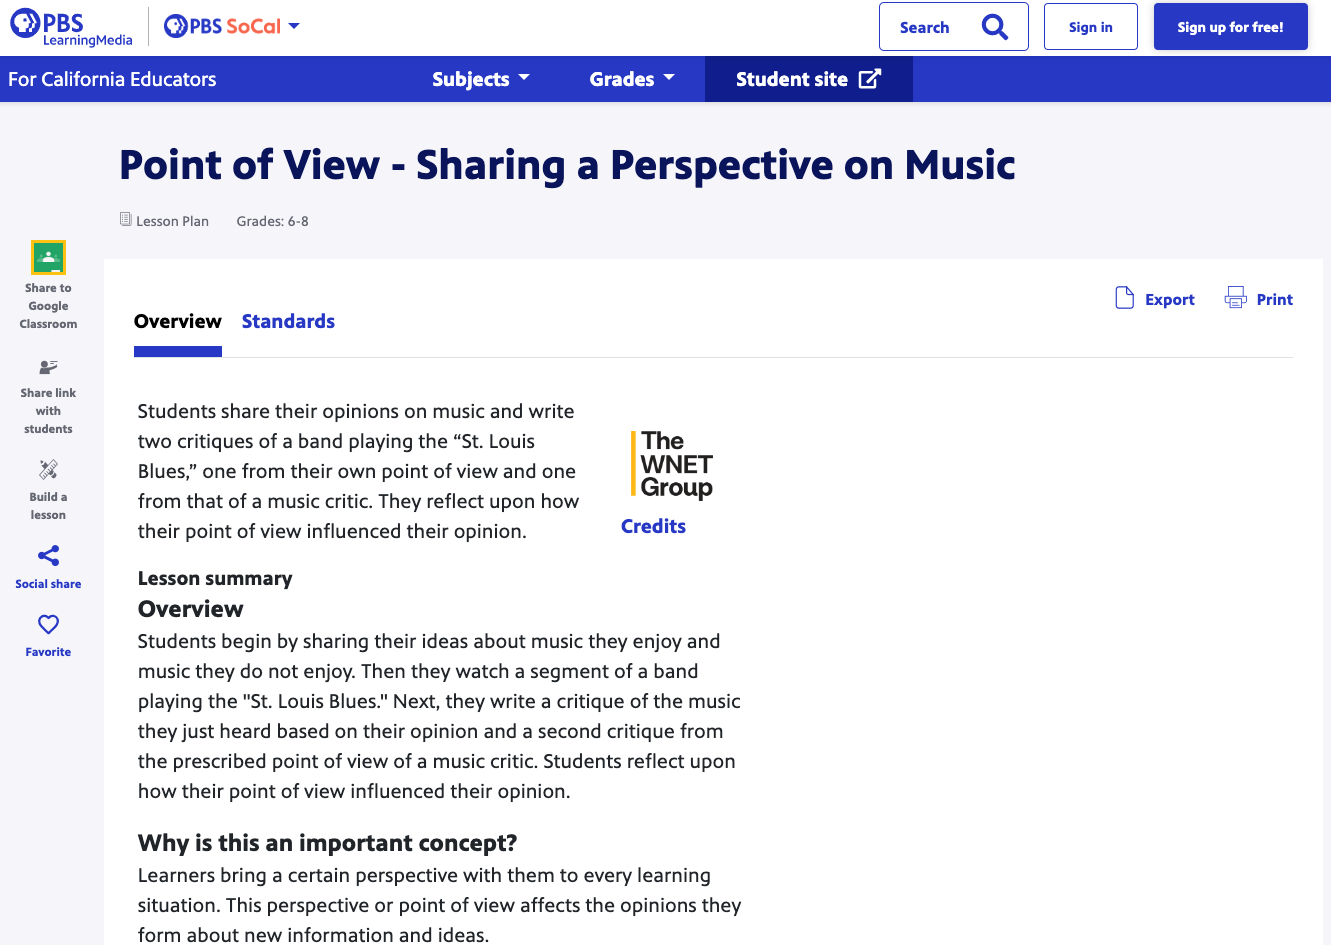 Sharing a Perspective on Music